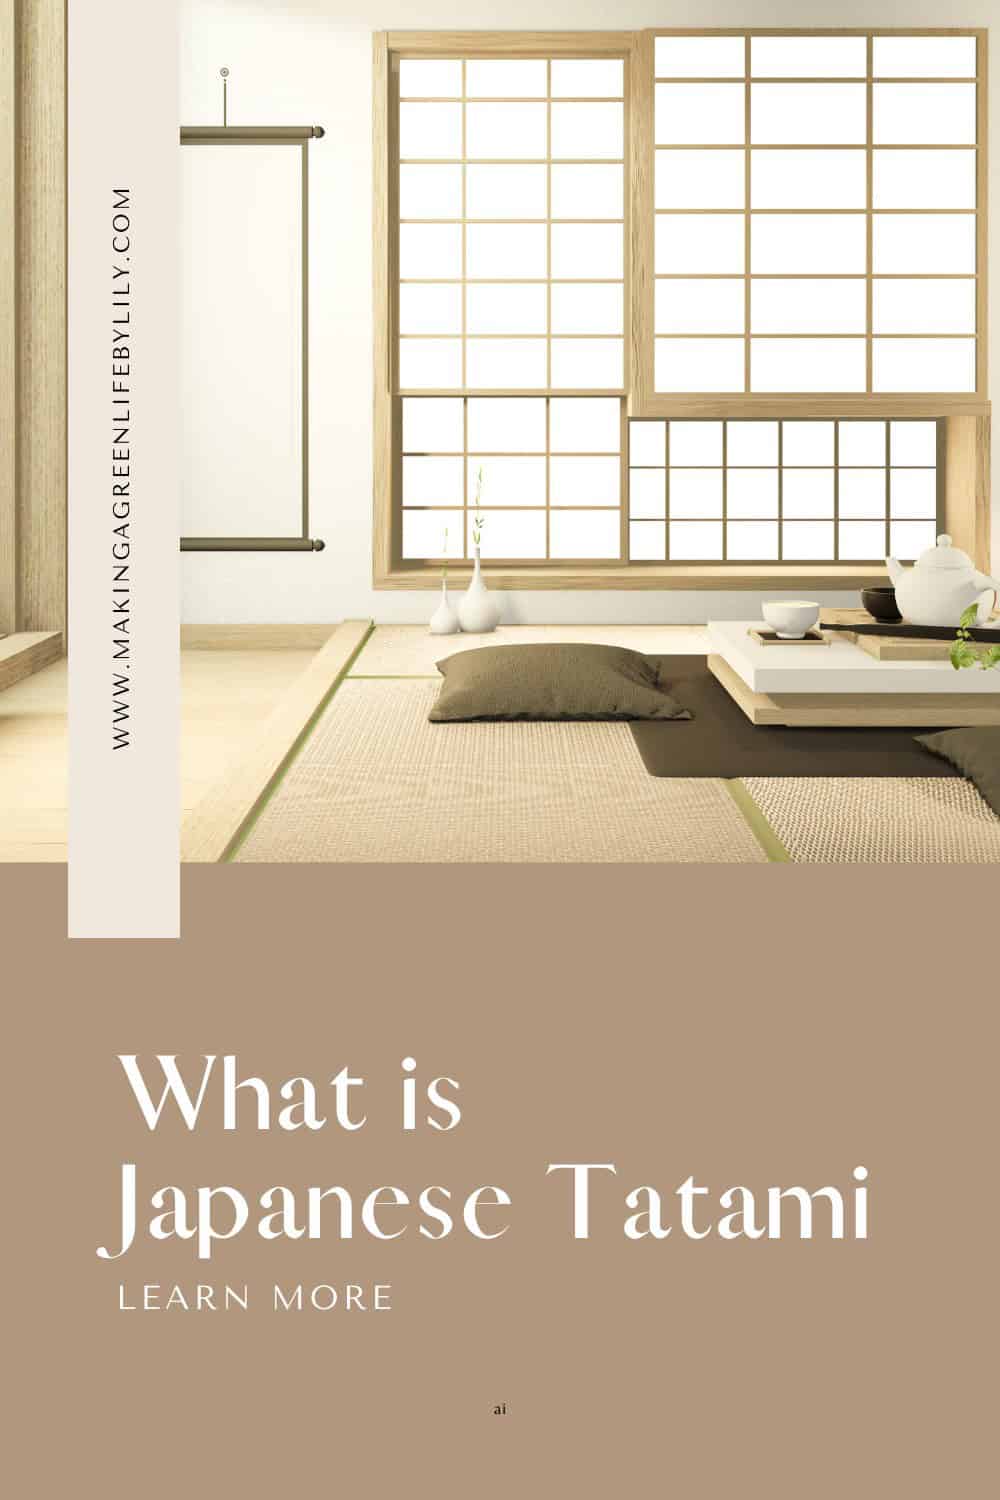 what is japanese tatami?